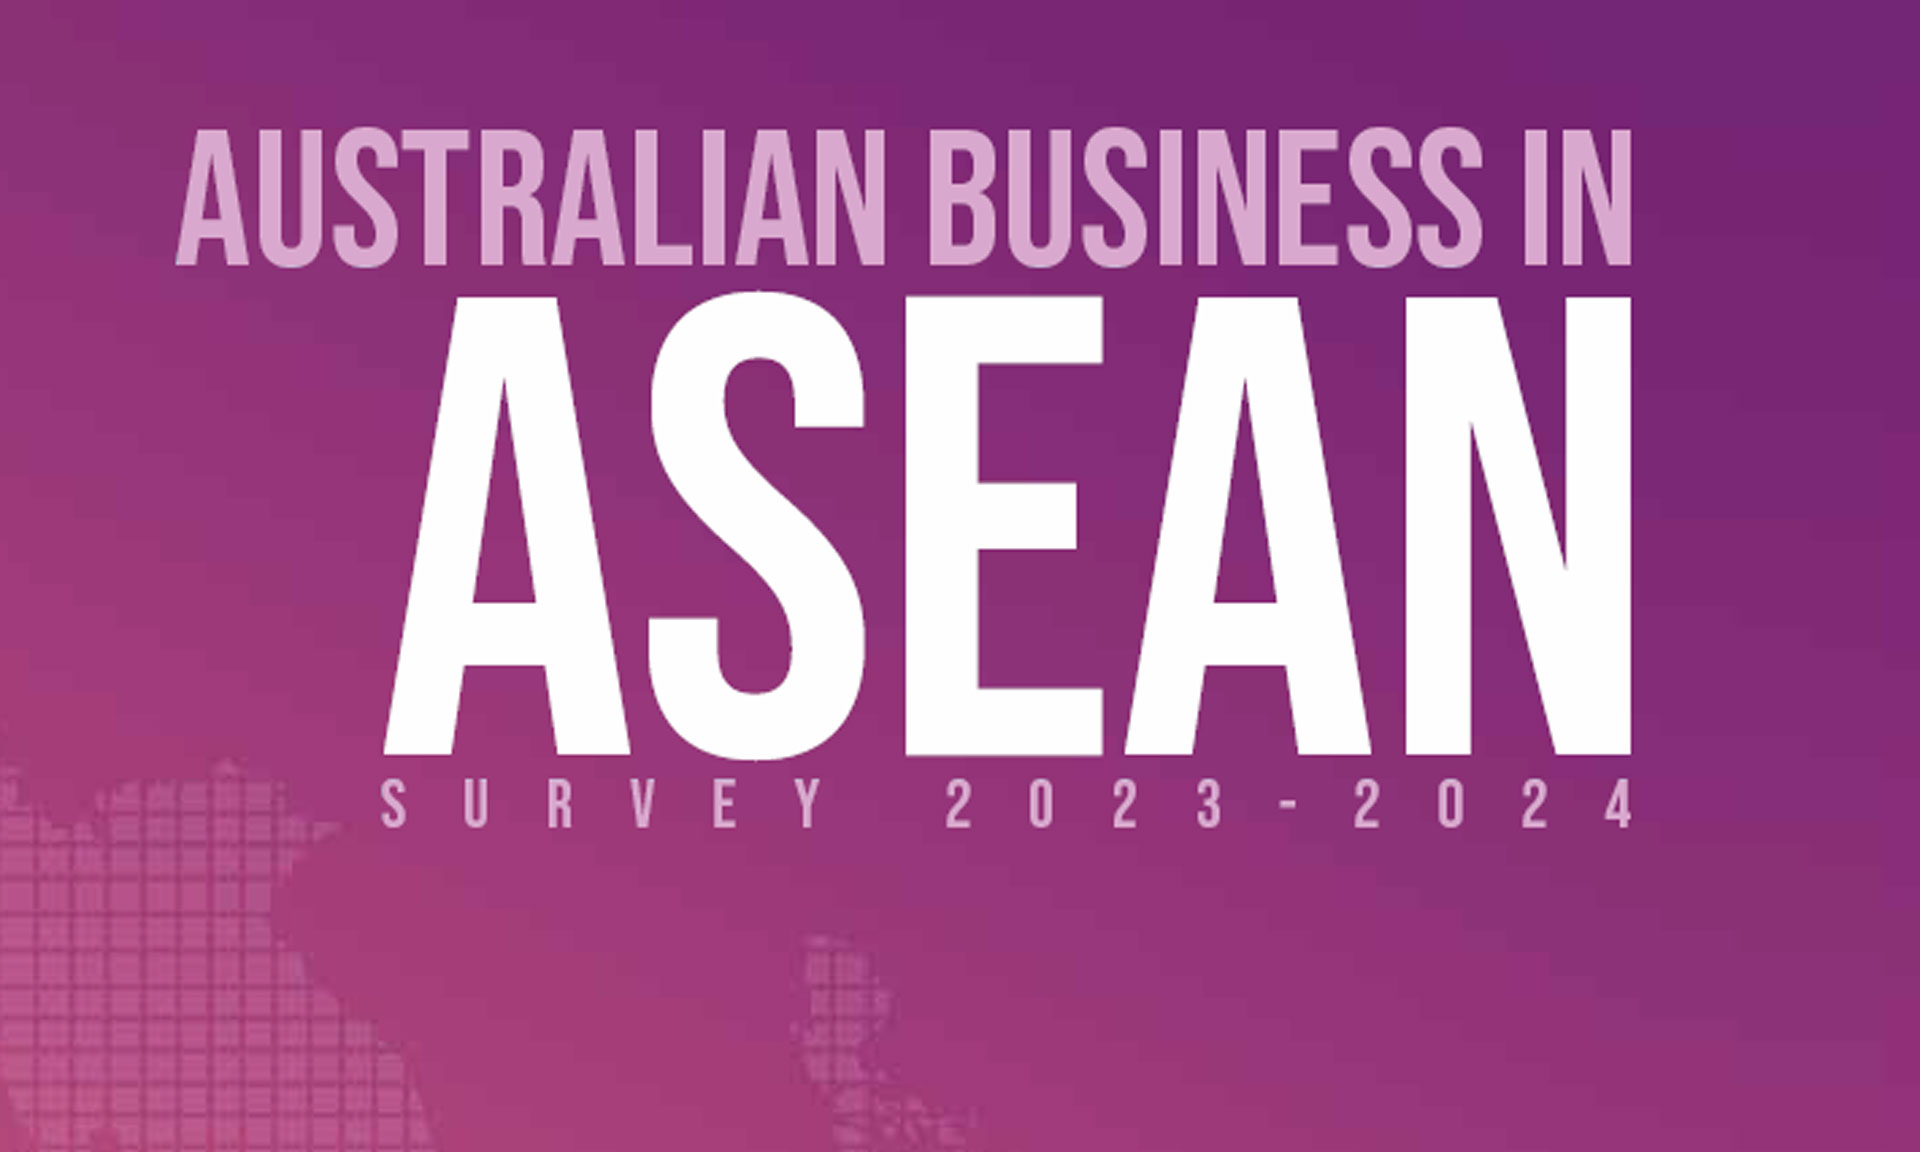 Text with Australian Business in ASEAN survey 2023 2024